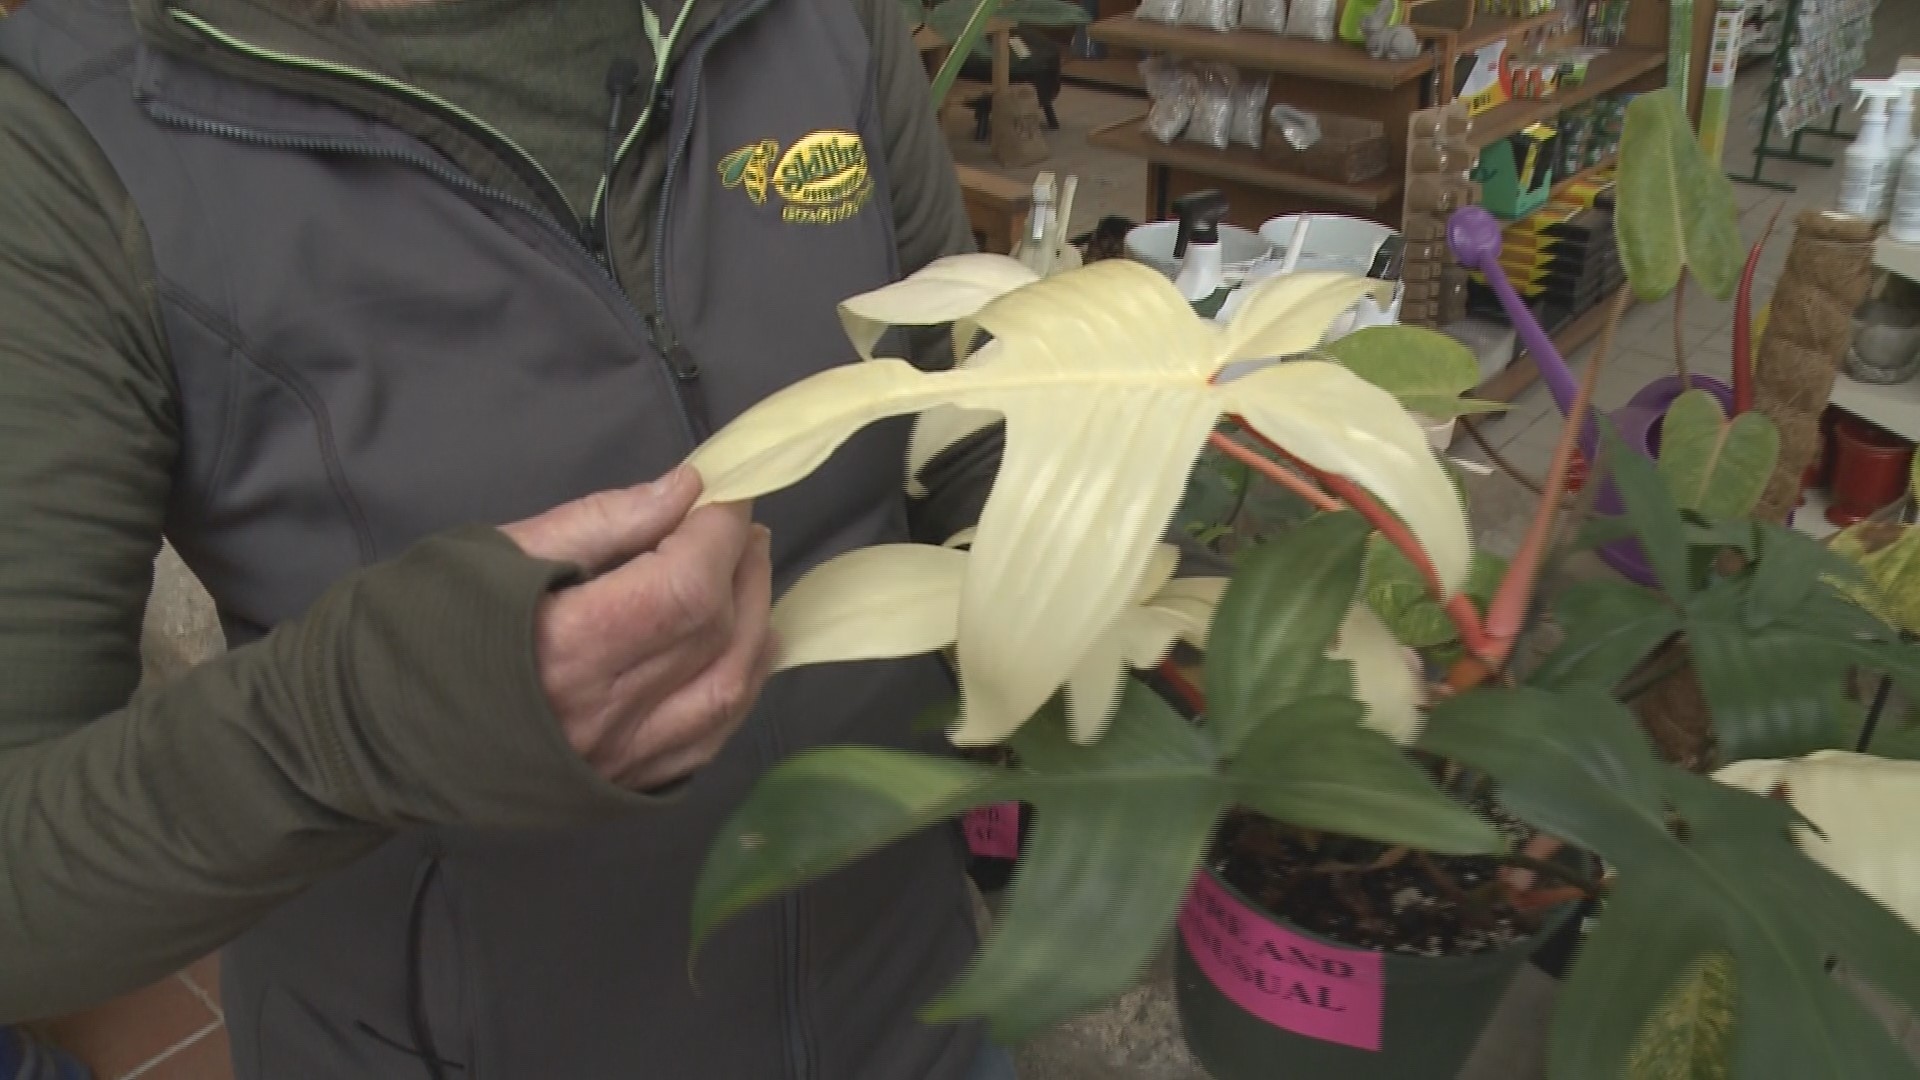 Gardening with Gutner was shocked to learn how expensive some houseplants are.